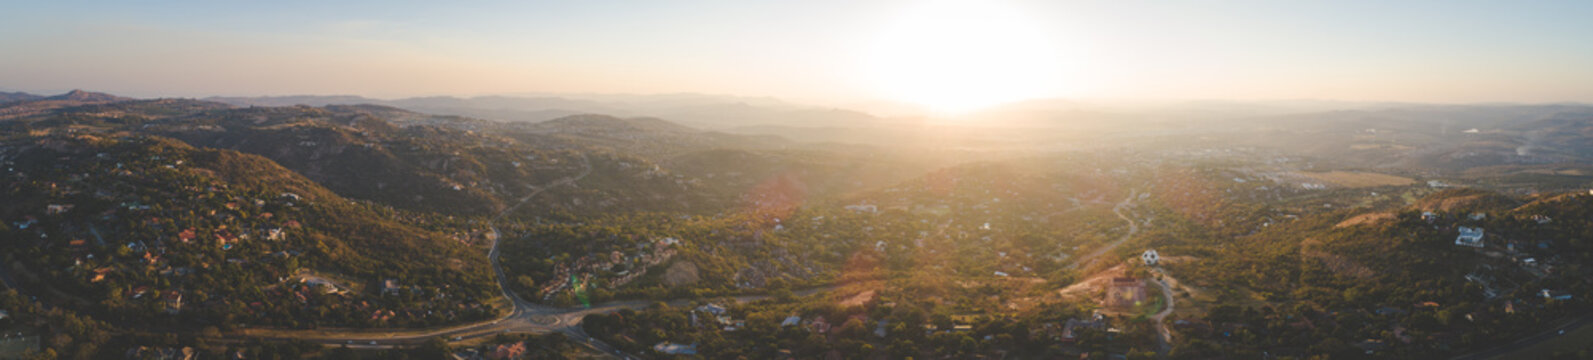 Panoramic aerial image over the town of Nelspruit / Mbombela in the Mpumalanga province of South Africa.